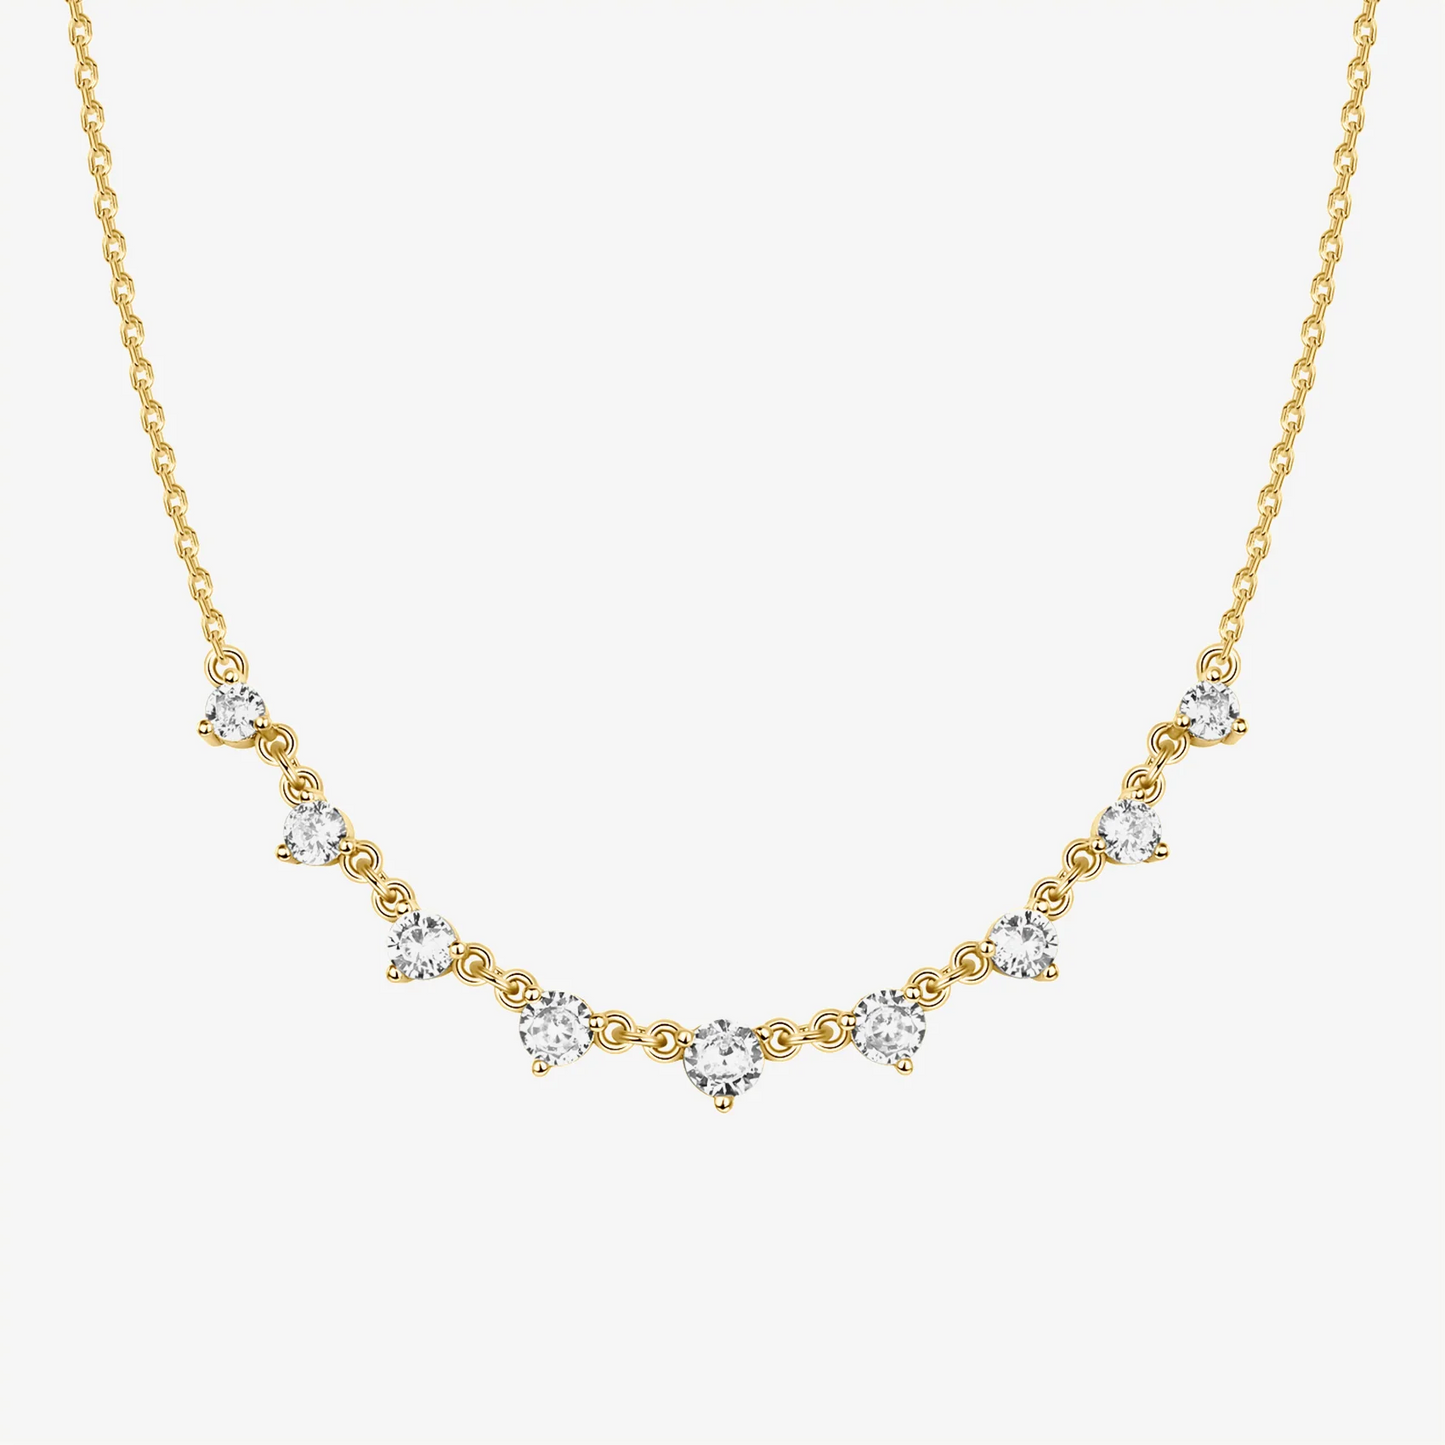 Cubic Zirconia Chain Necklace Gift for Her